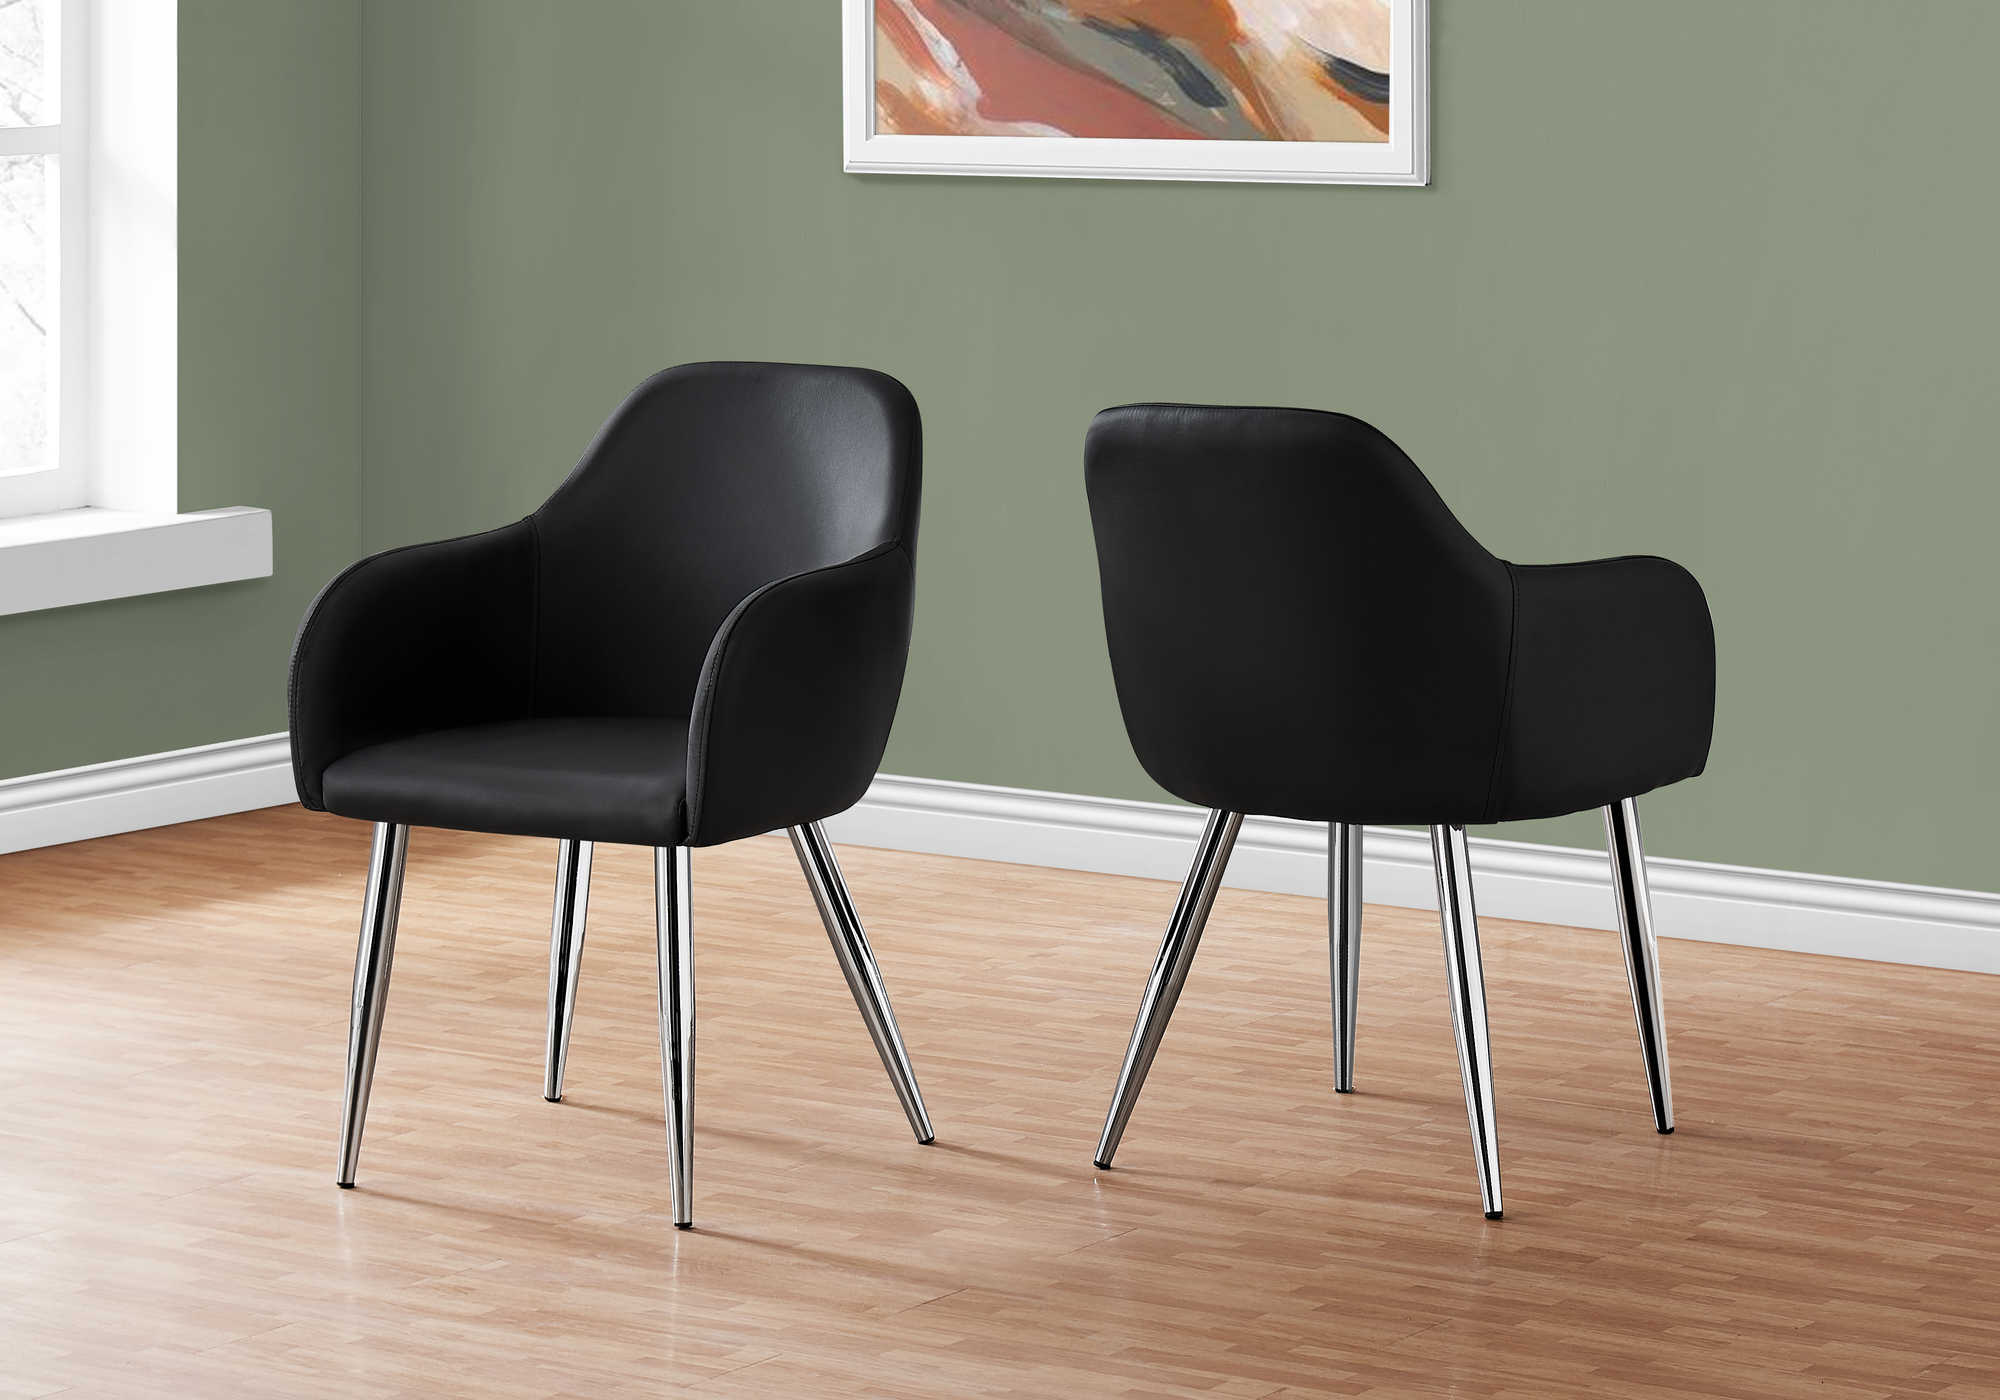 DINING CHAIR - 2PCS / 33"H / BLACK LEATHER-LOOK / CHROME